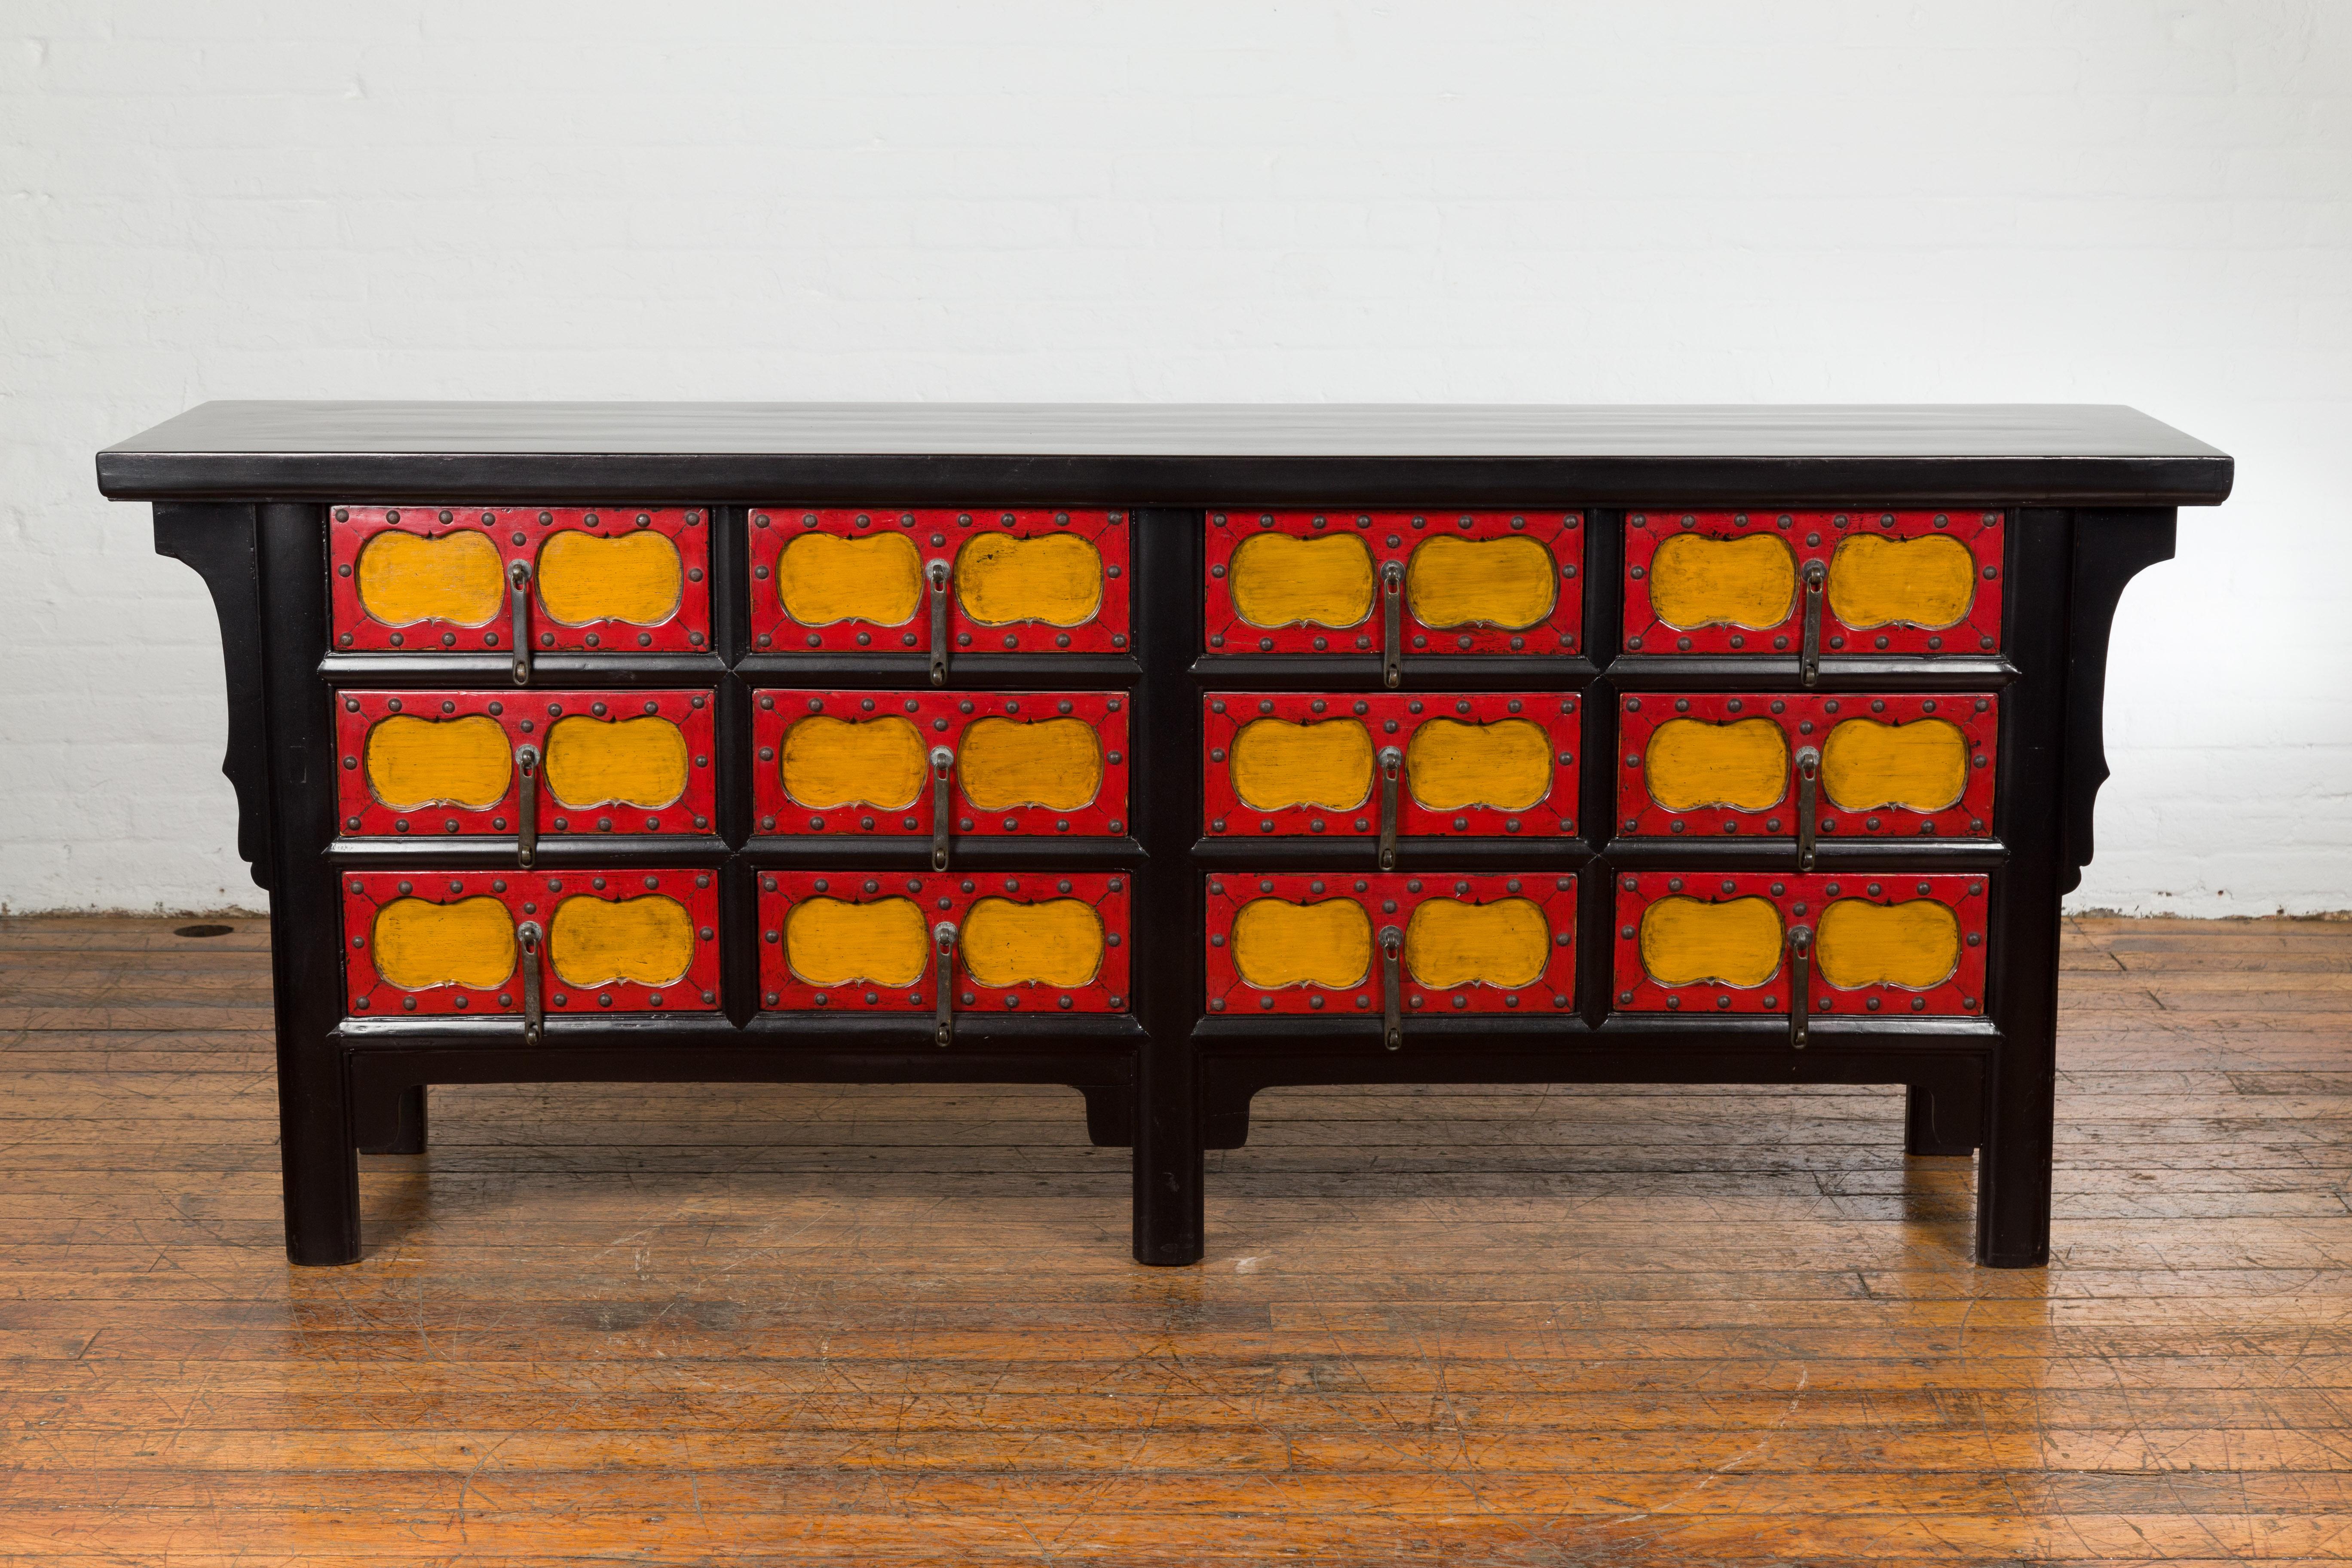 A Chinese Qing Dynasty period long sideboard from the 19th century with black lacquer structure, 12 drawers adorned with yellow recessed cartouches surrounded by red lacquer frames. Experience the timeless sophistication of 19th-century Chinese